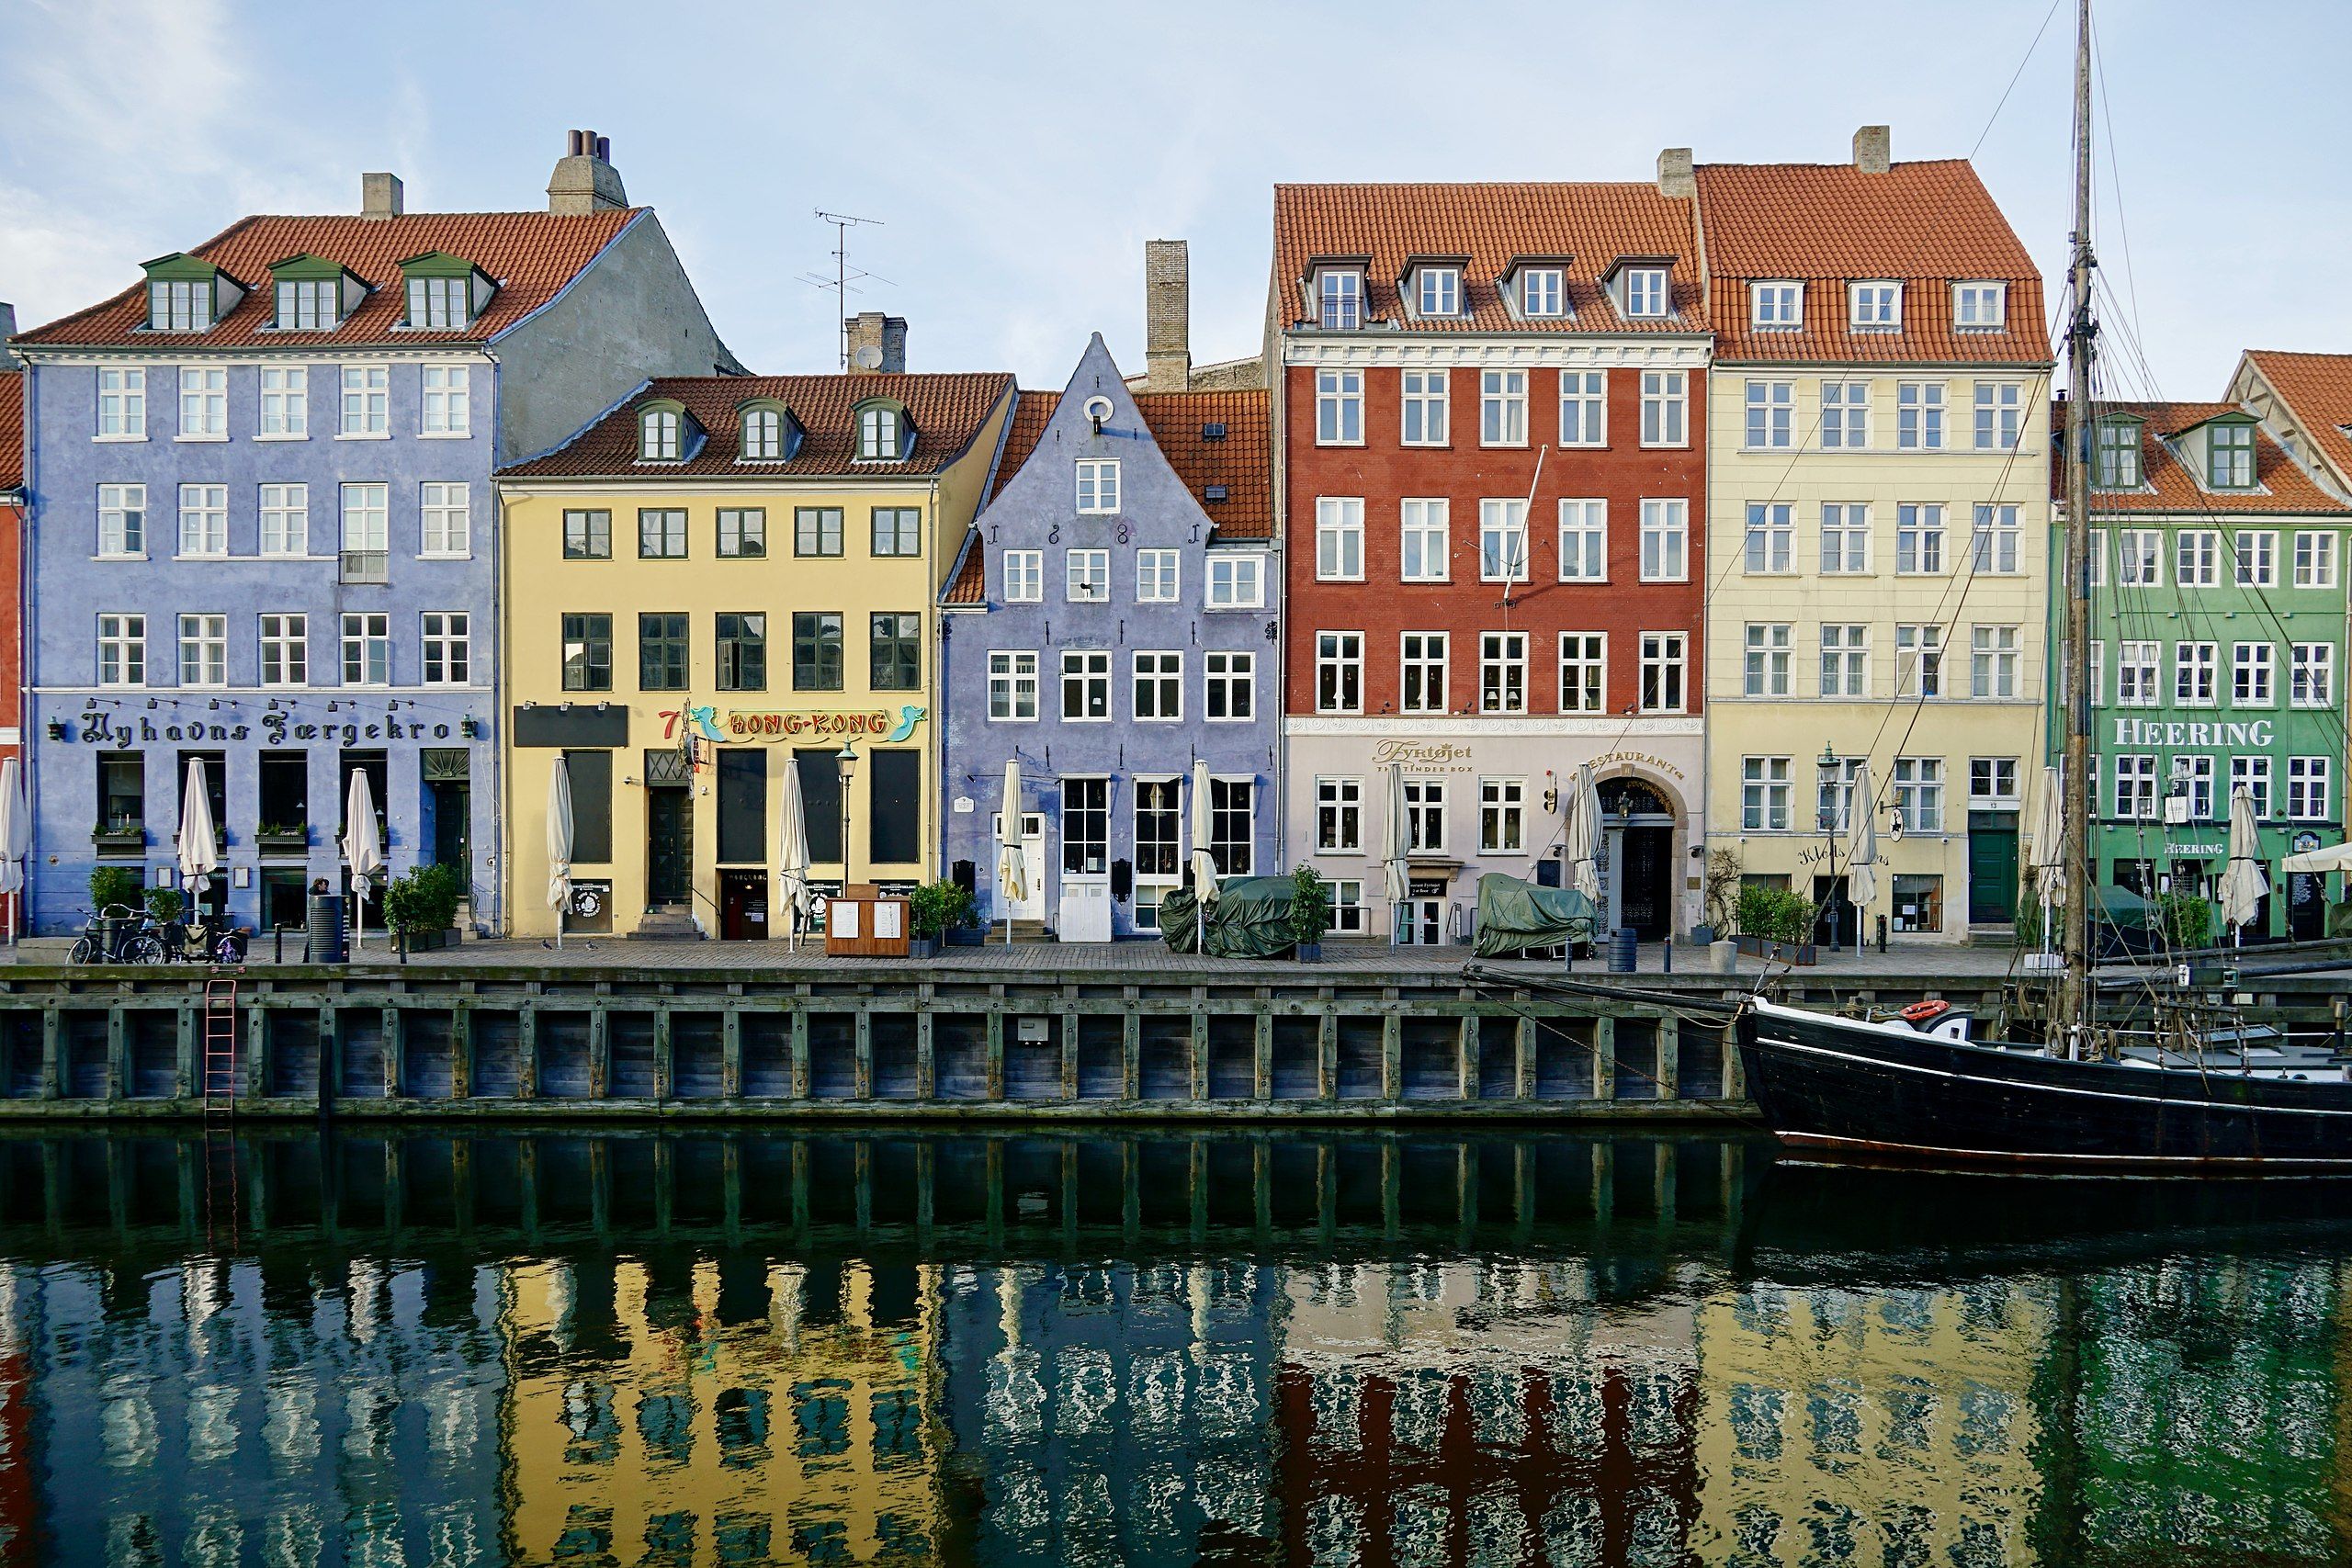 What to do in Denmark during the summer